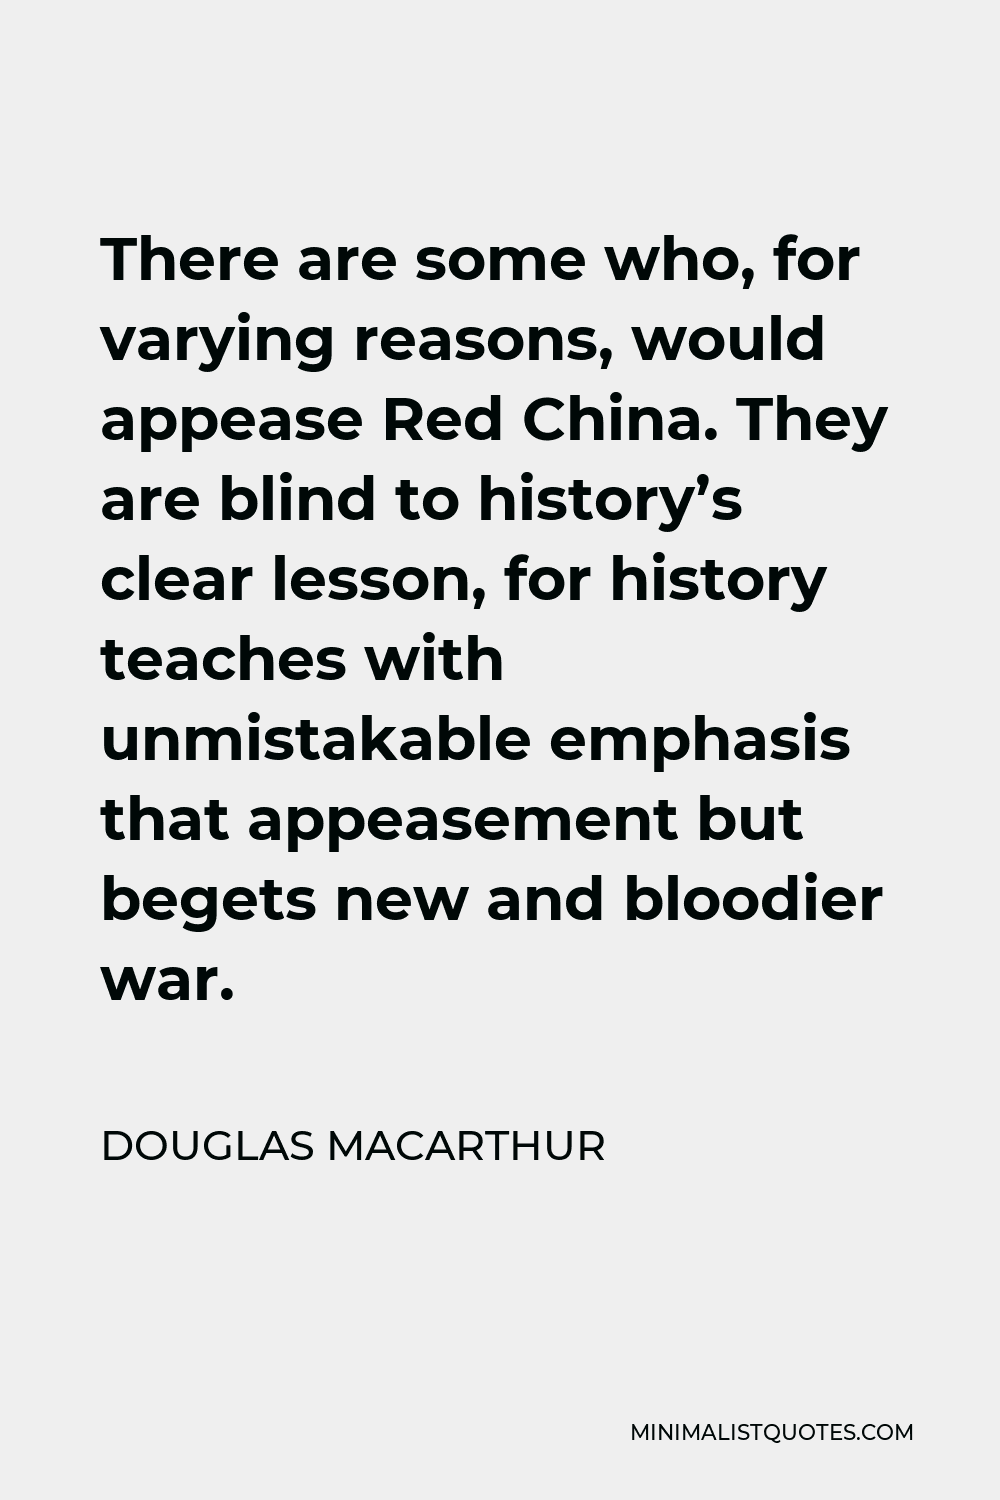 Douglas MacArthur Quote - There are some who, for varying reasons, would appease Red China. They are blind to history’s clear lesson, for history teaches with unmistakable emphasis that appeasement but begets new and bloodier war.